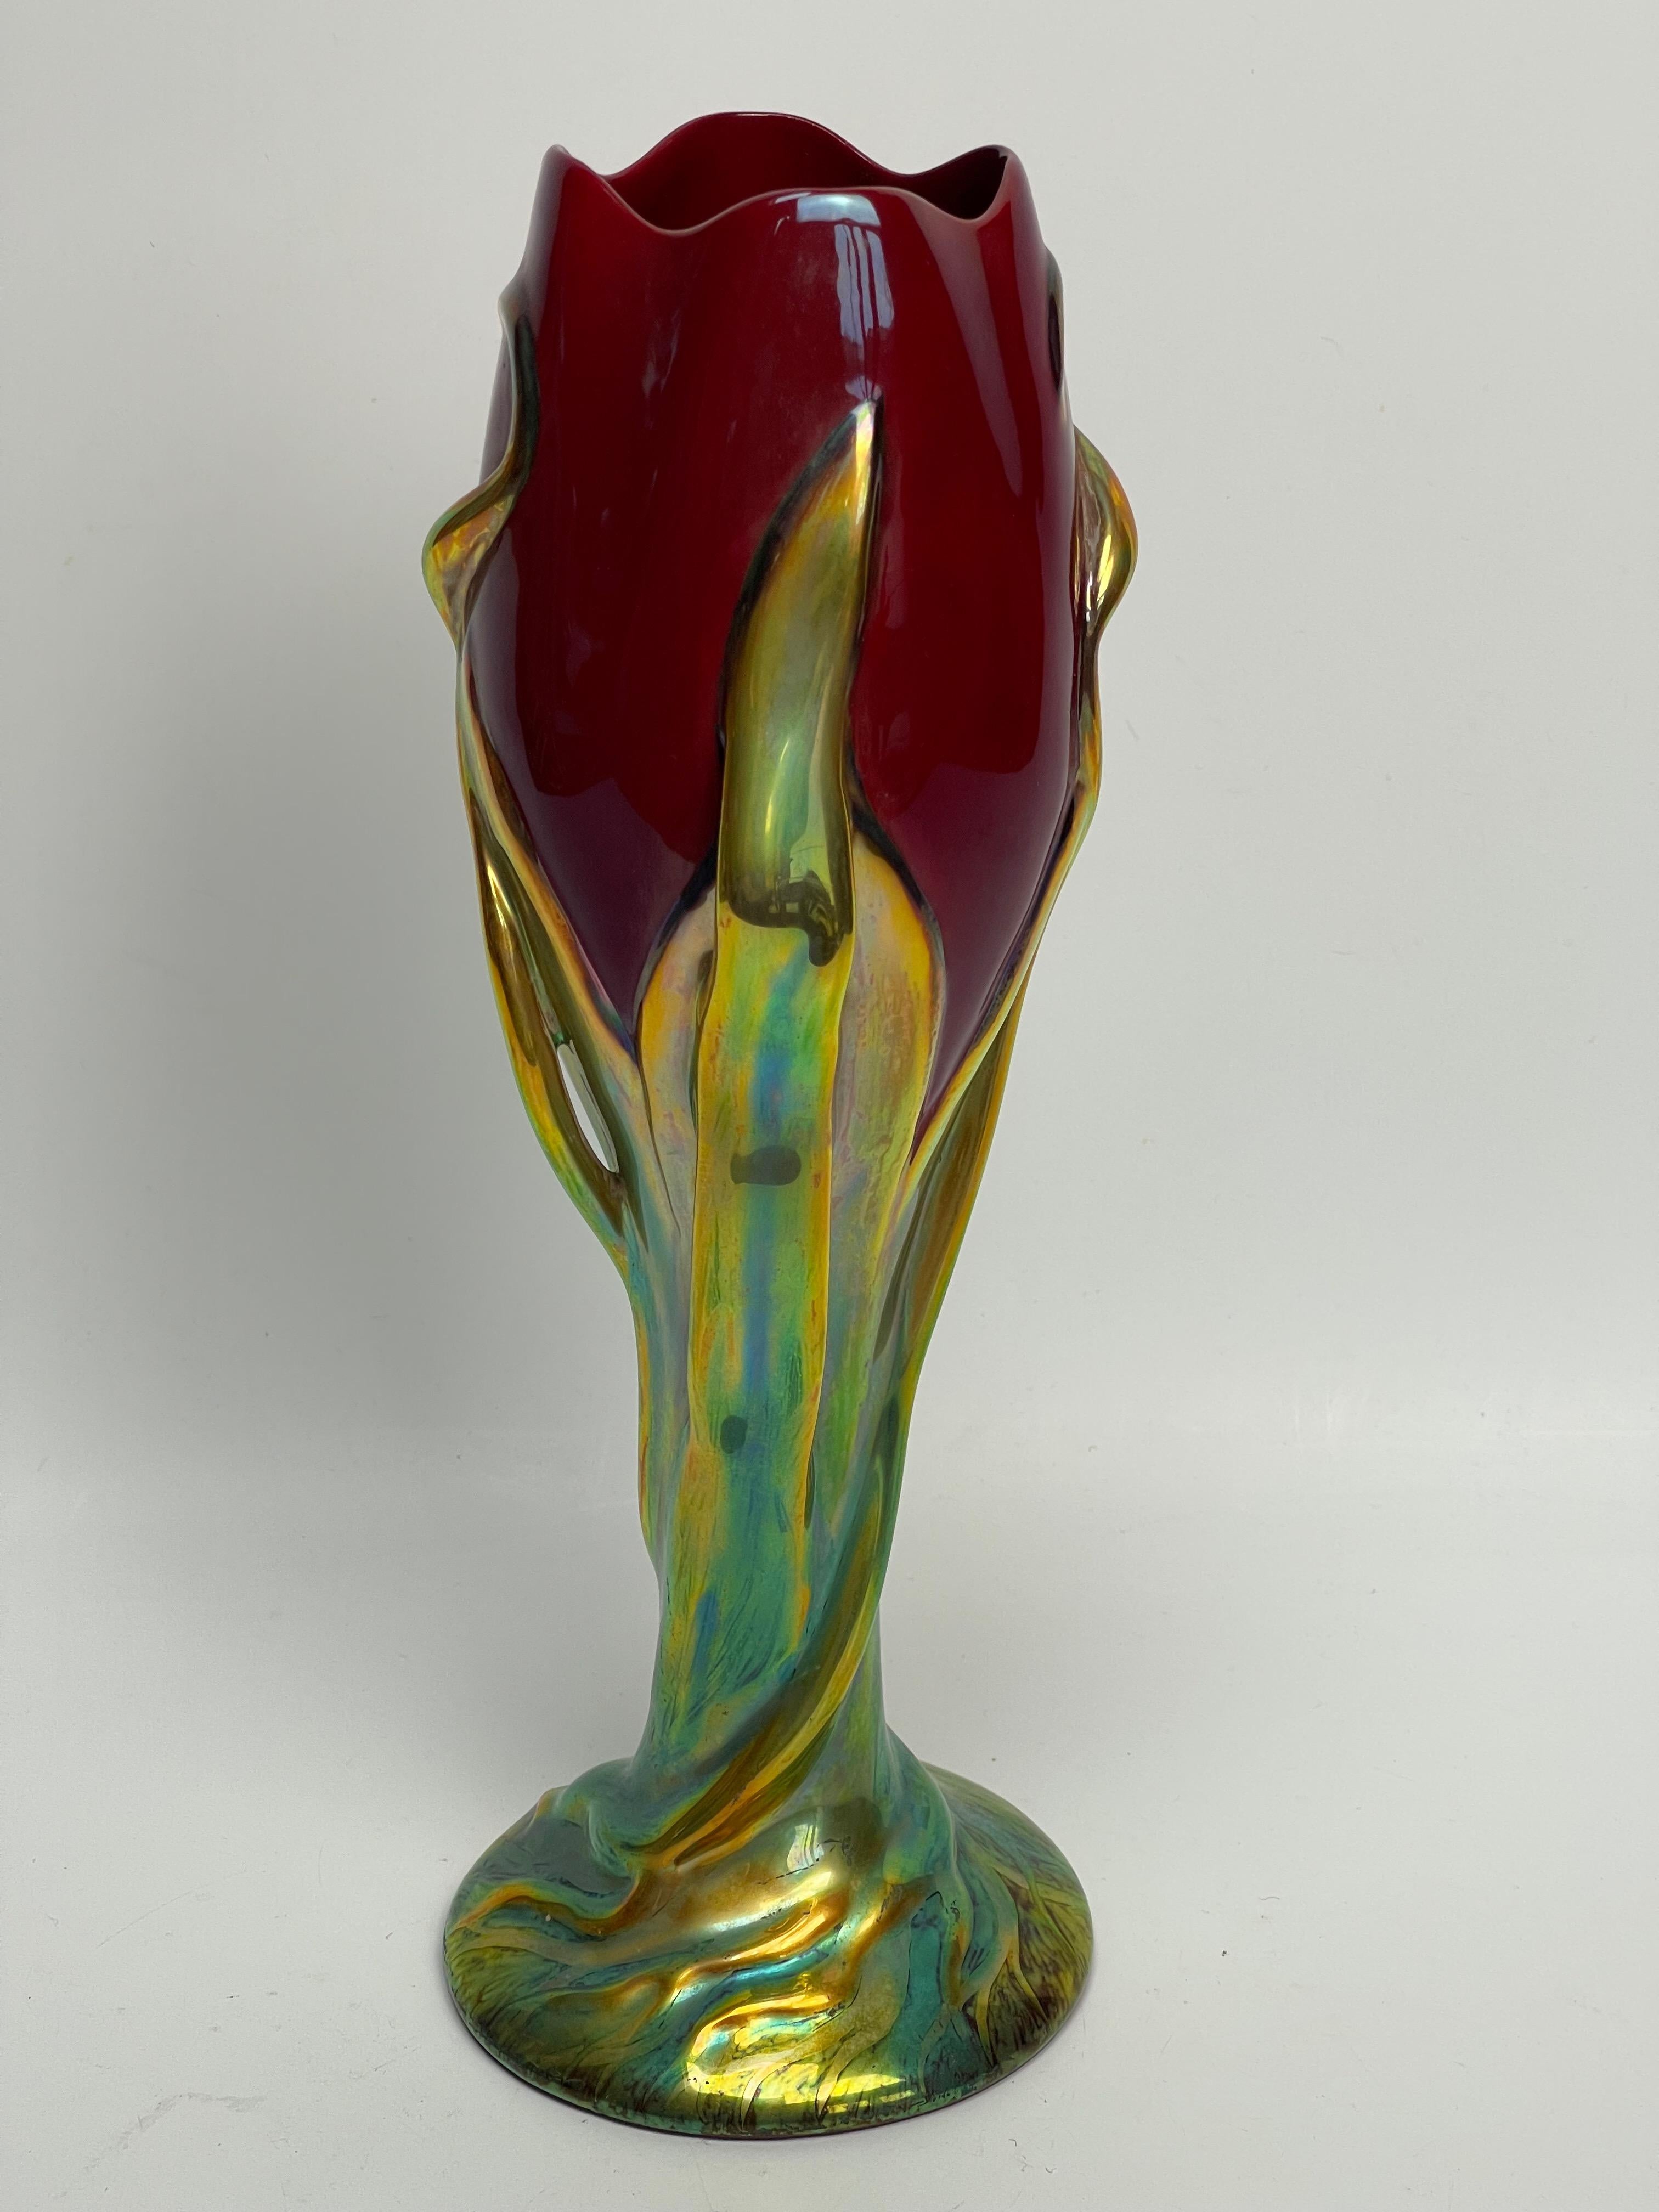 Zsolnay factory tulip vase. 80s reissue by Miss Eszter Jorok.
Numbered 5495.
Vase from the 1899 Tulip series.
Vase in perfect condition, note a small cooking defect inside one of the leaves in application. See on photo.
Diameter: foot 10